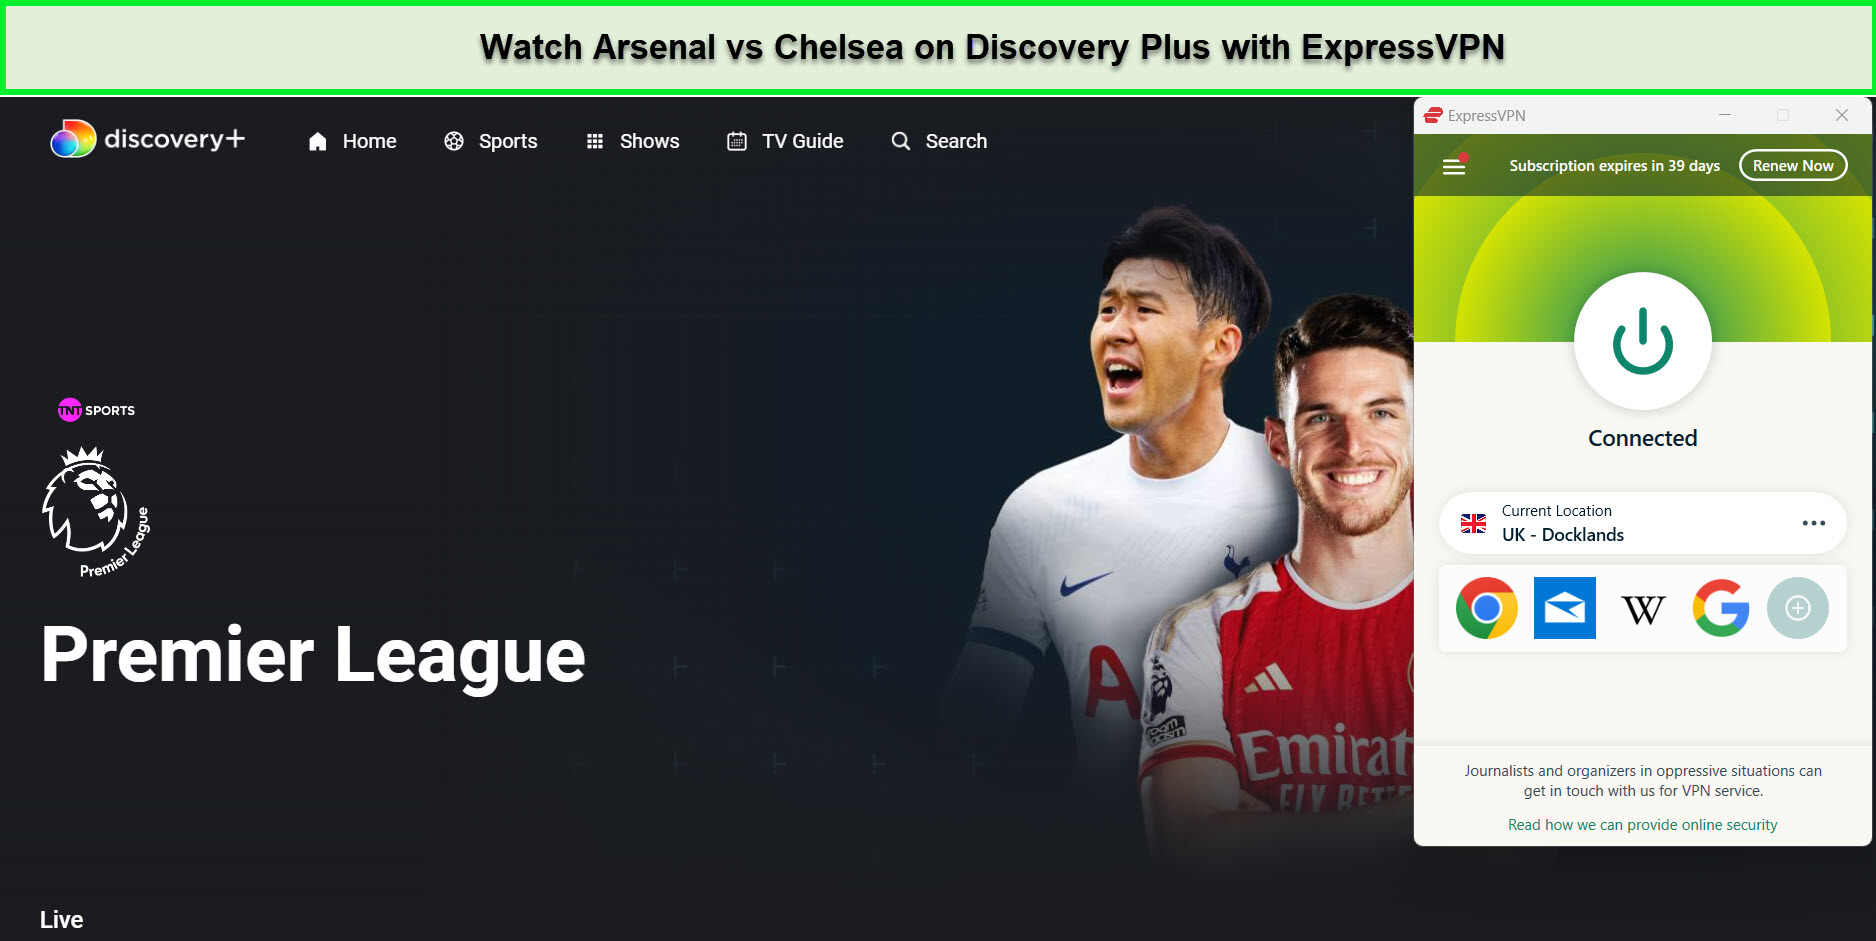 Watch-Arsenal-vs-Chelsea-in-Australia-on-Discovery-Plus-with-ExpressVPN